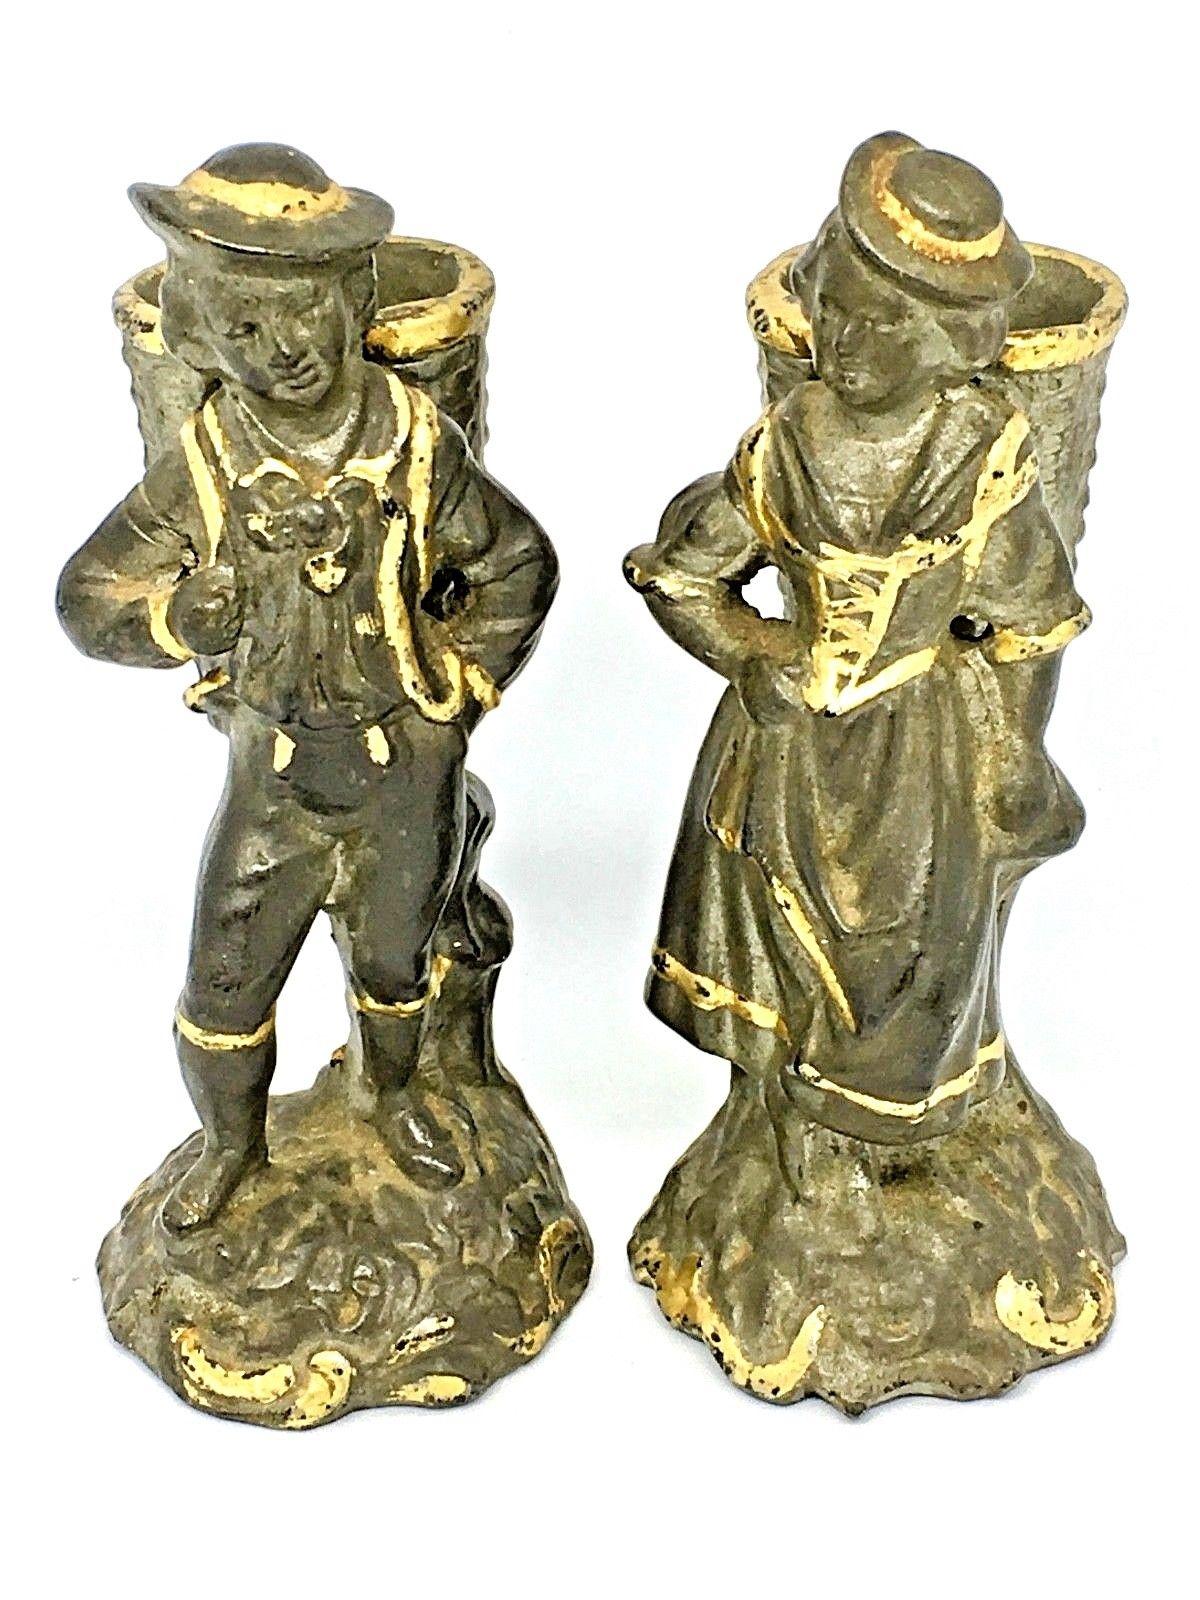 Two antique decorative toothpick holder figurines. Each made of ceramic. A nice original antique item for displaying or just to use. They are in the original as found condition. A very charming set in very good condition. Nice for every table.